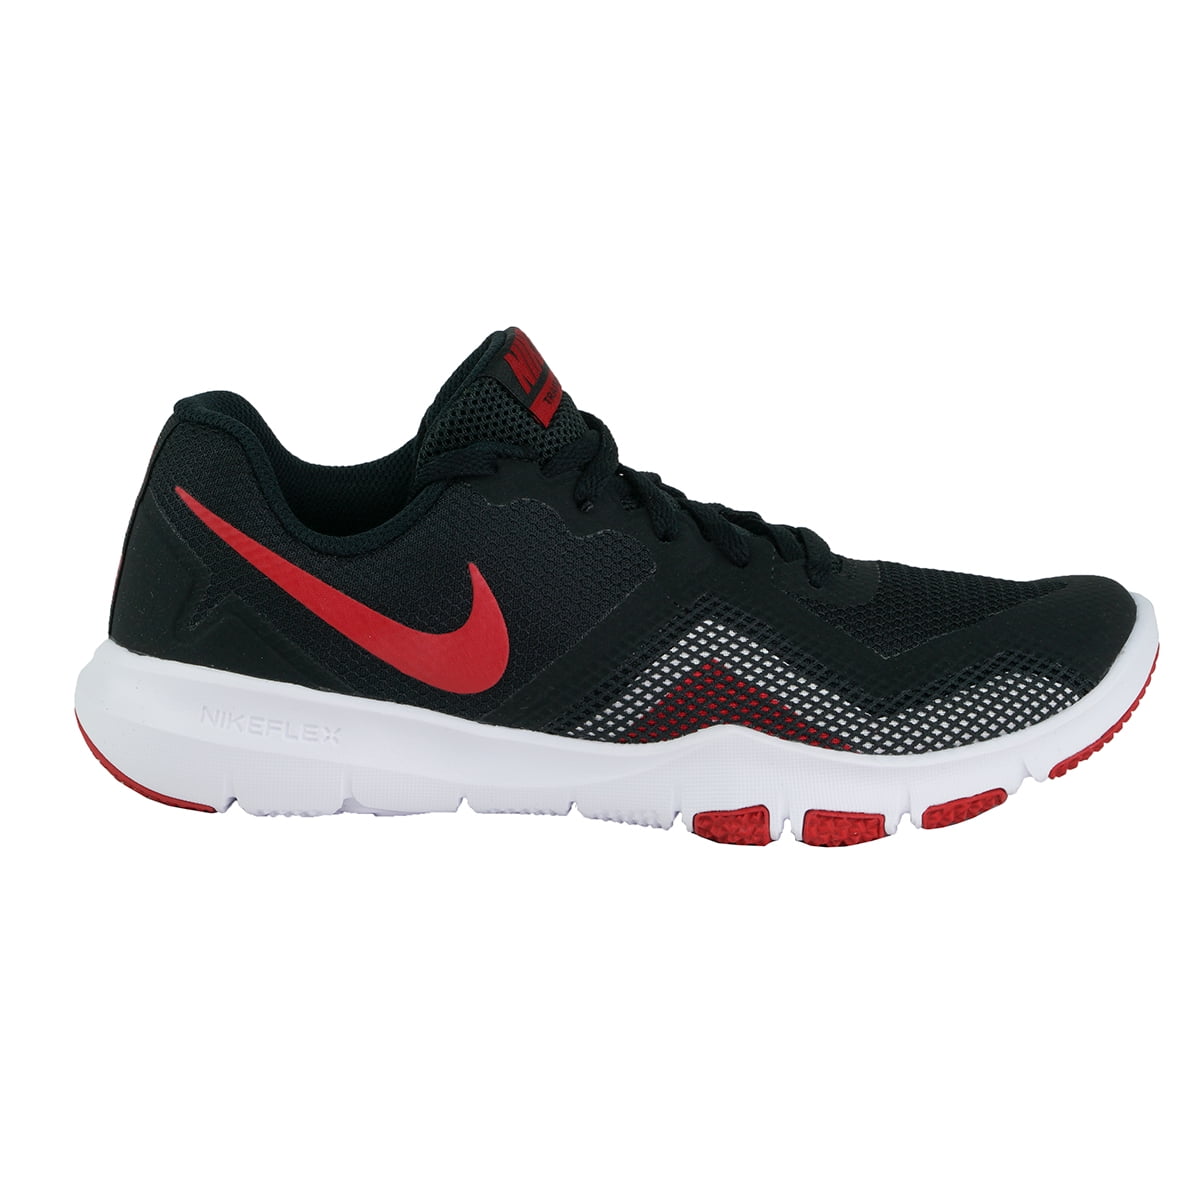 nike flex red and black